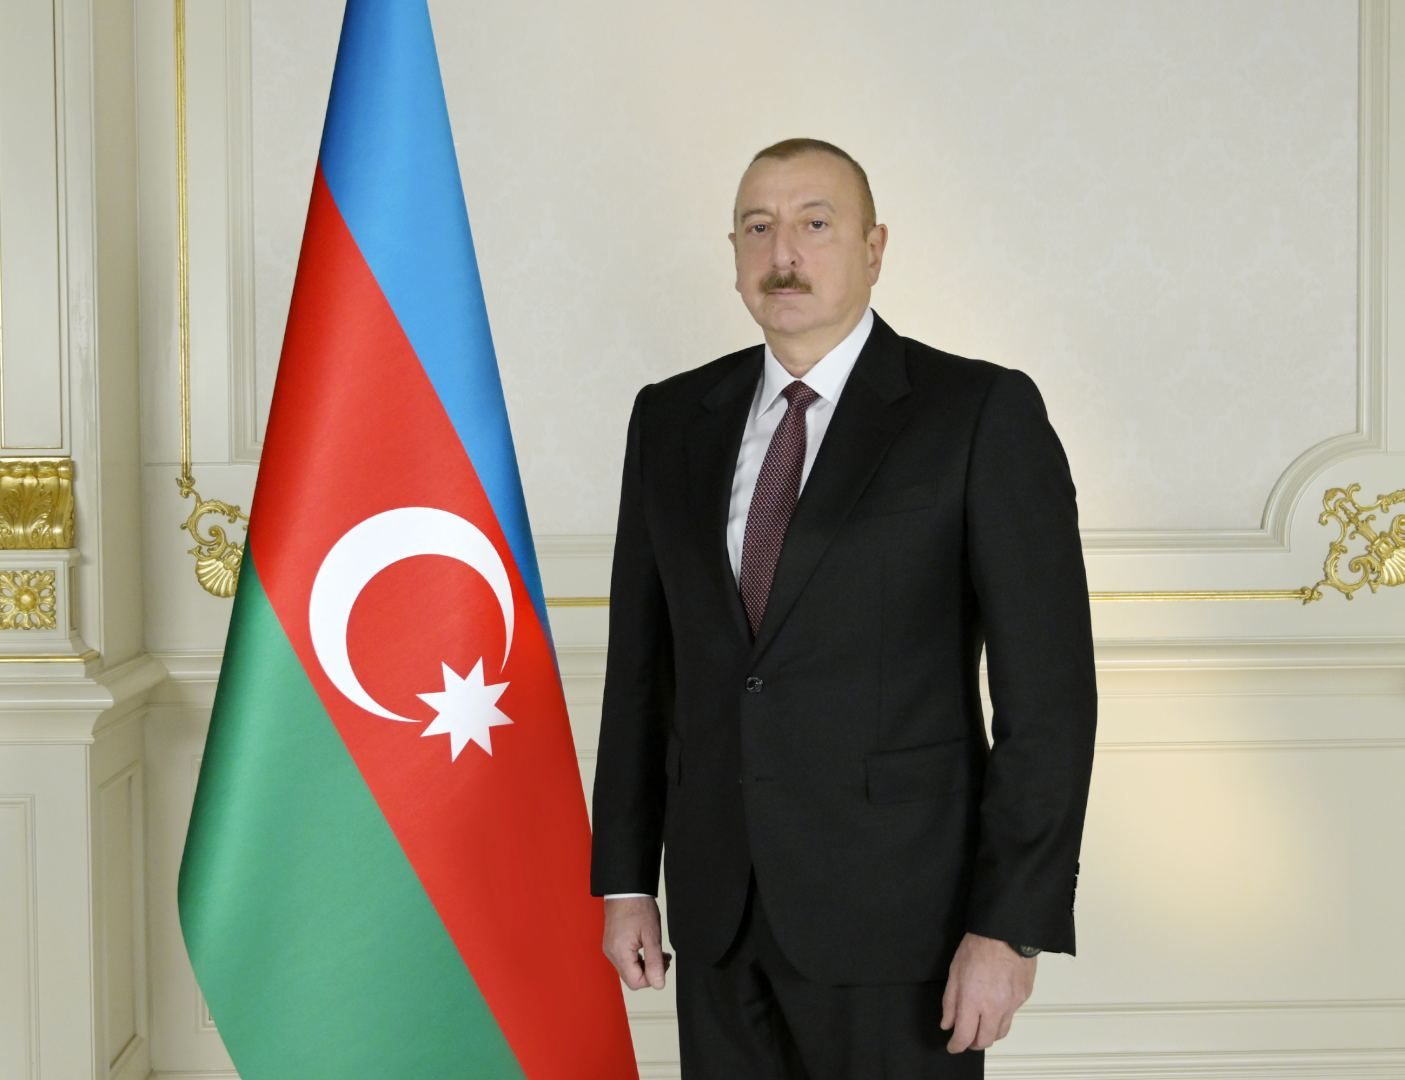 Azerbaijan approves agreement on cargo traffic between member states of Organization of Turkic States